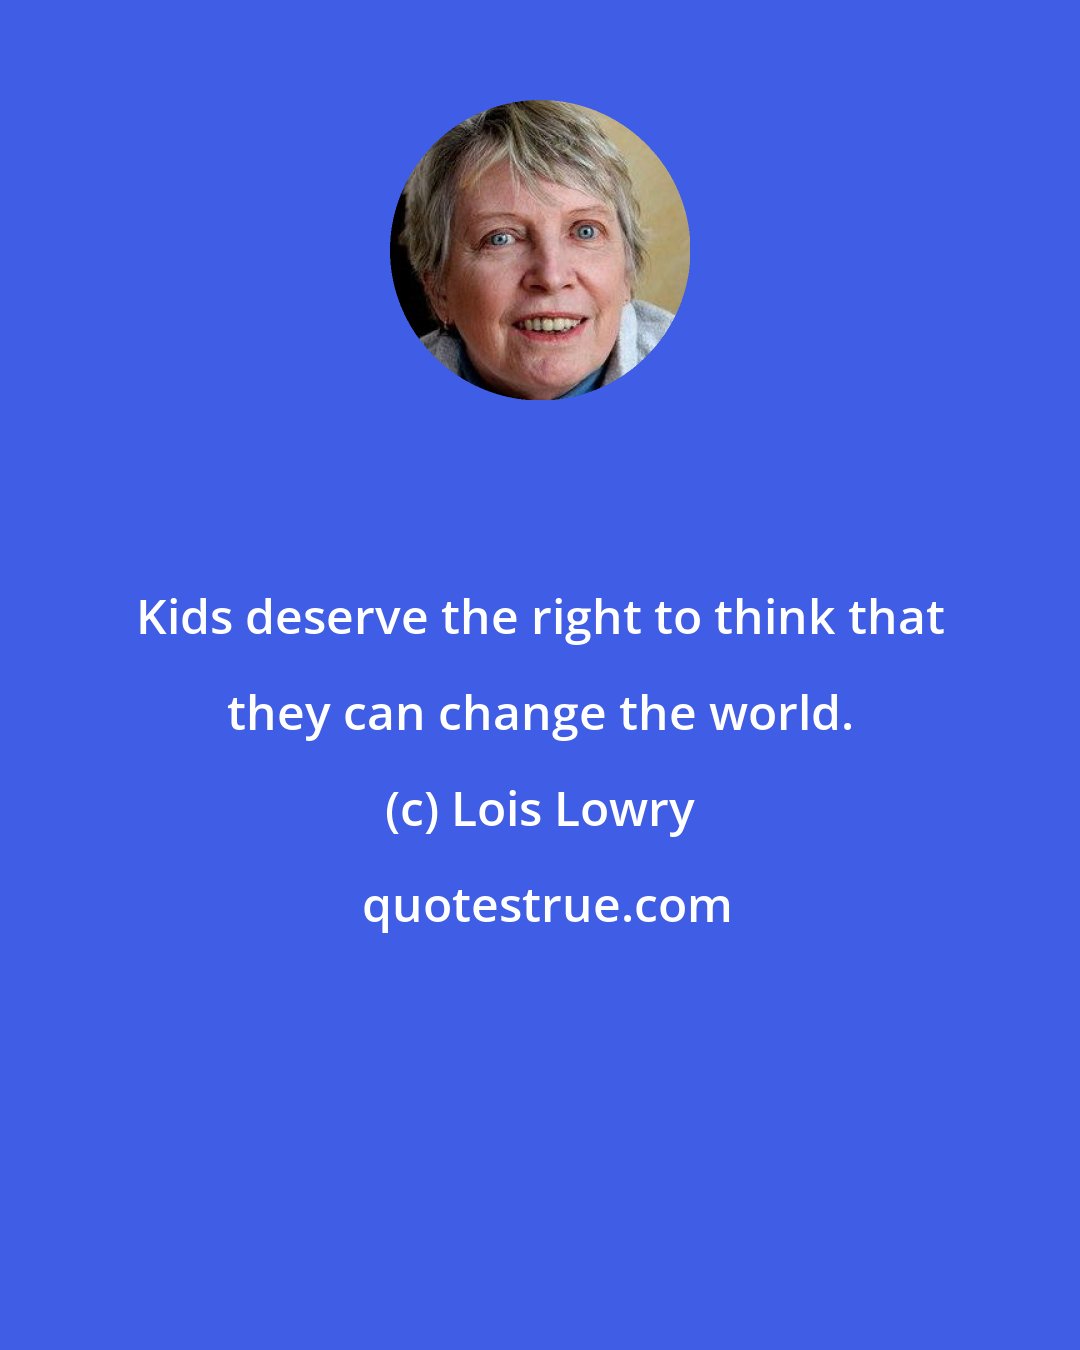 Lois Lowry: Kids deserve the right to think that they can change the world.